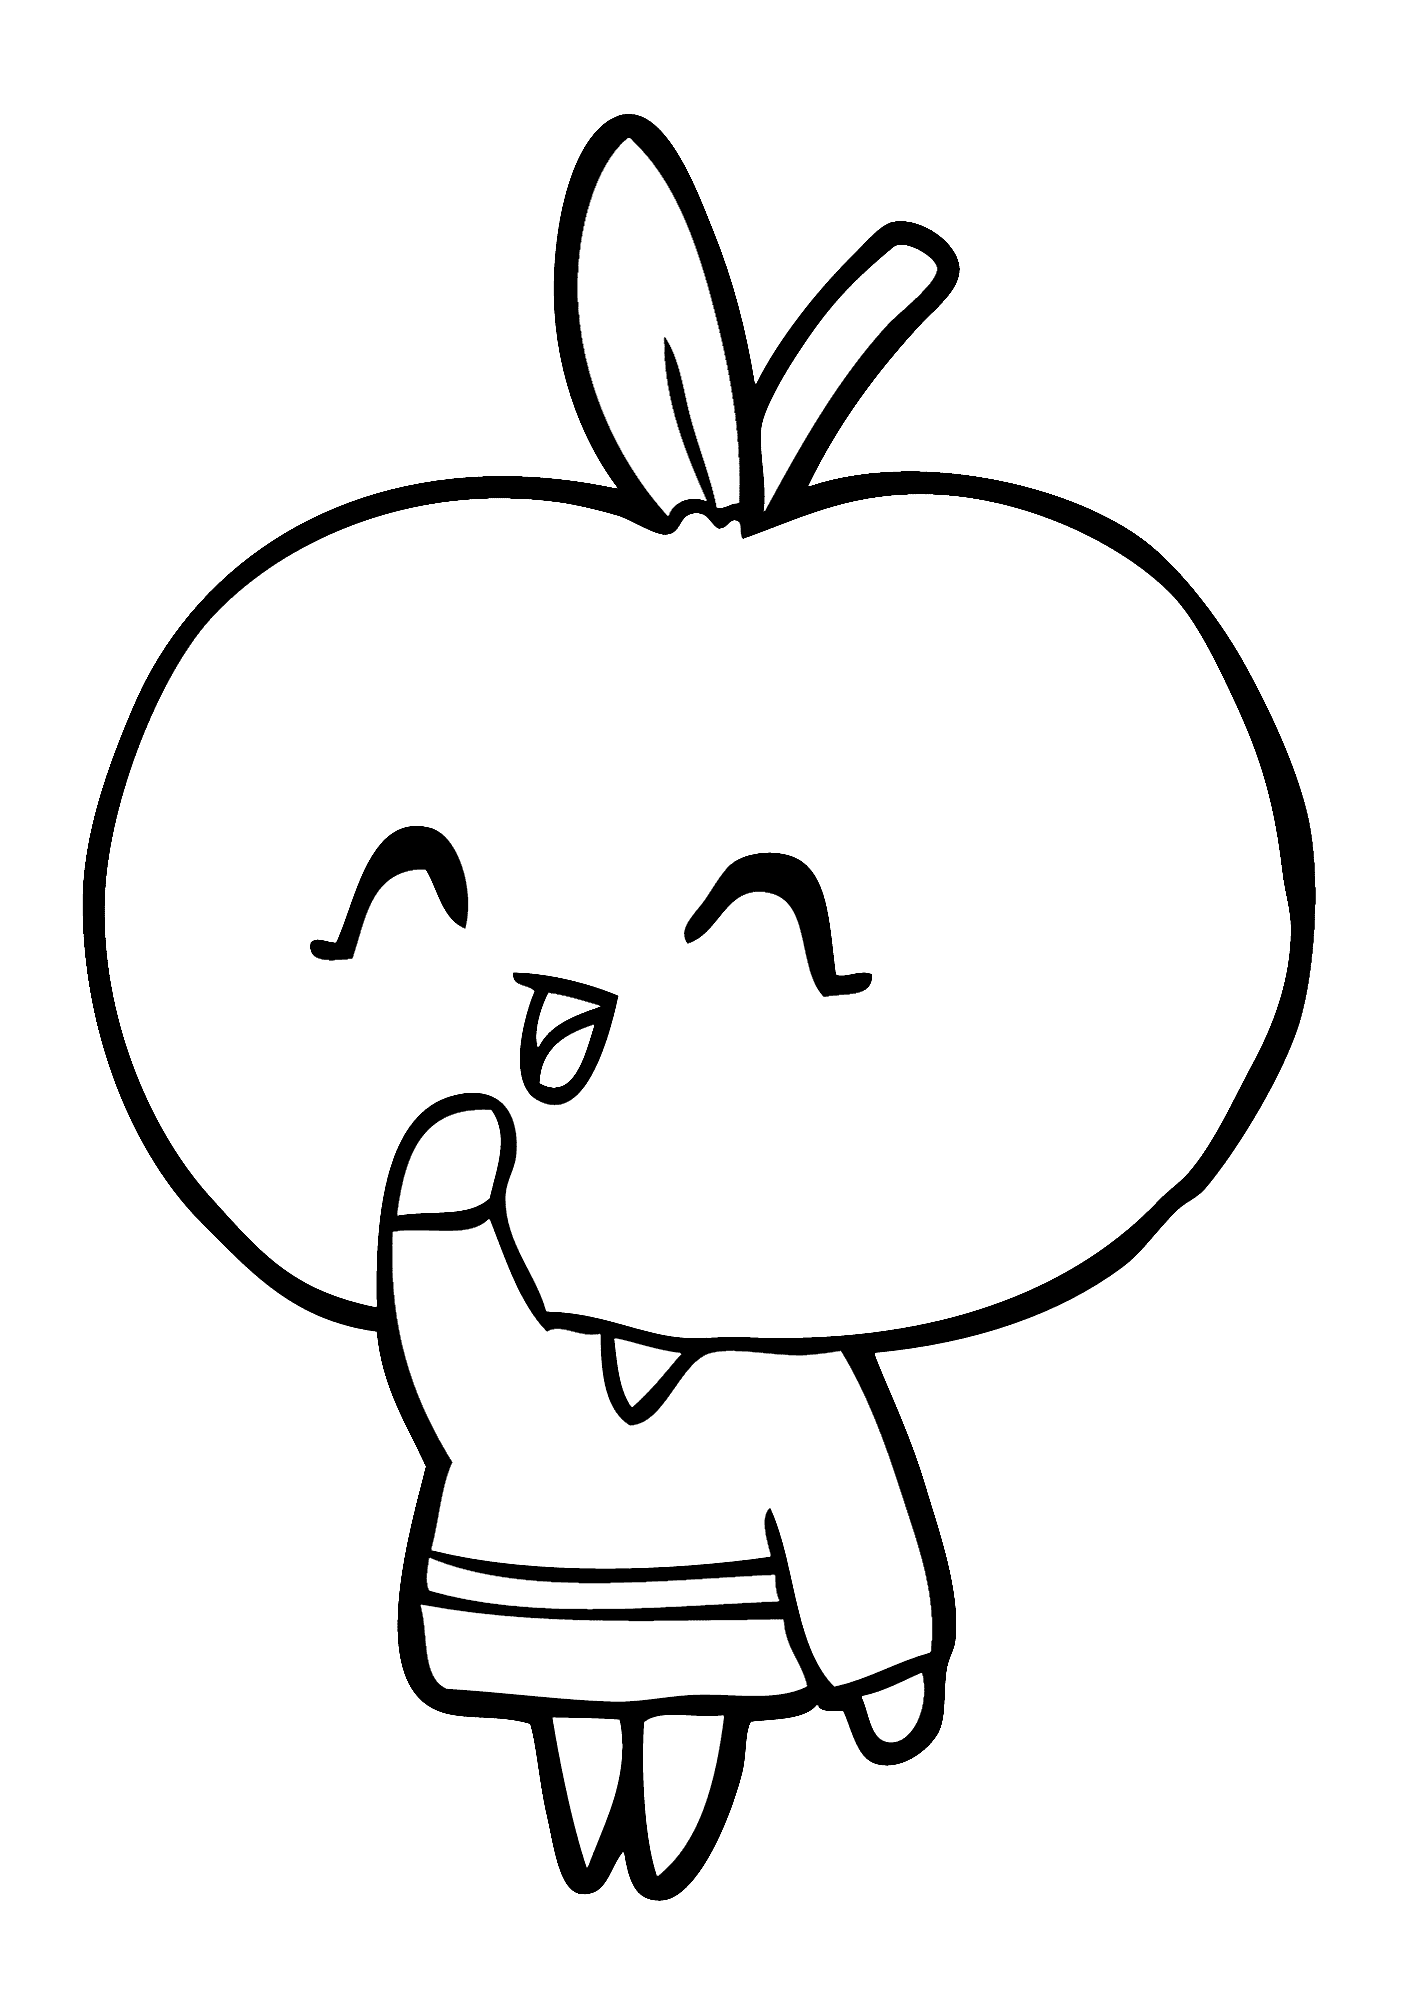 Apple Smile Cartoon Coloring Pages